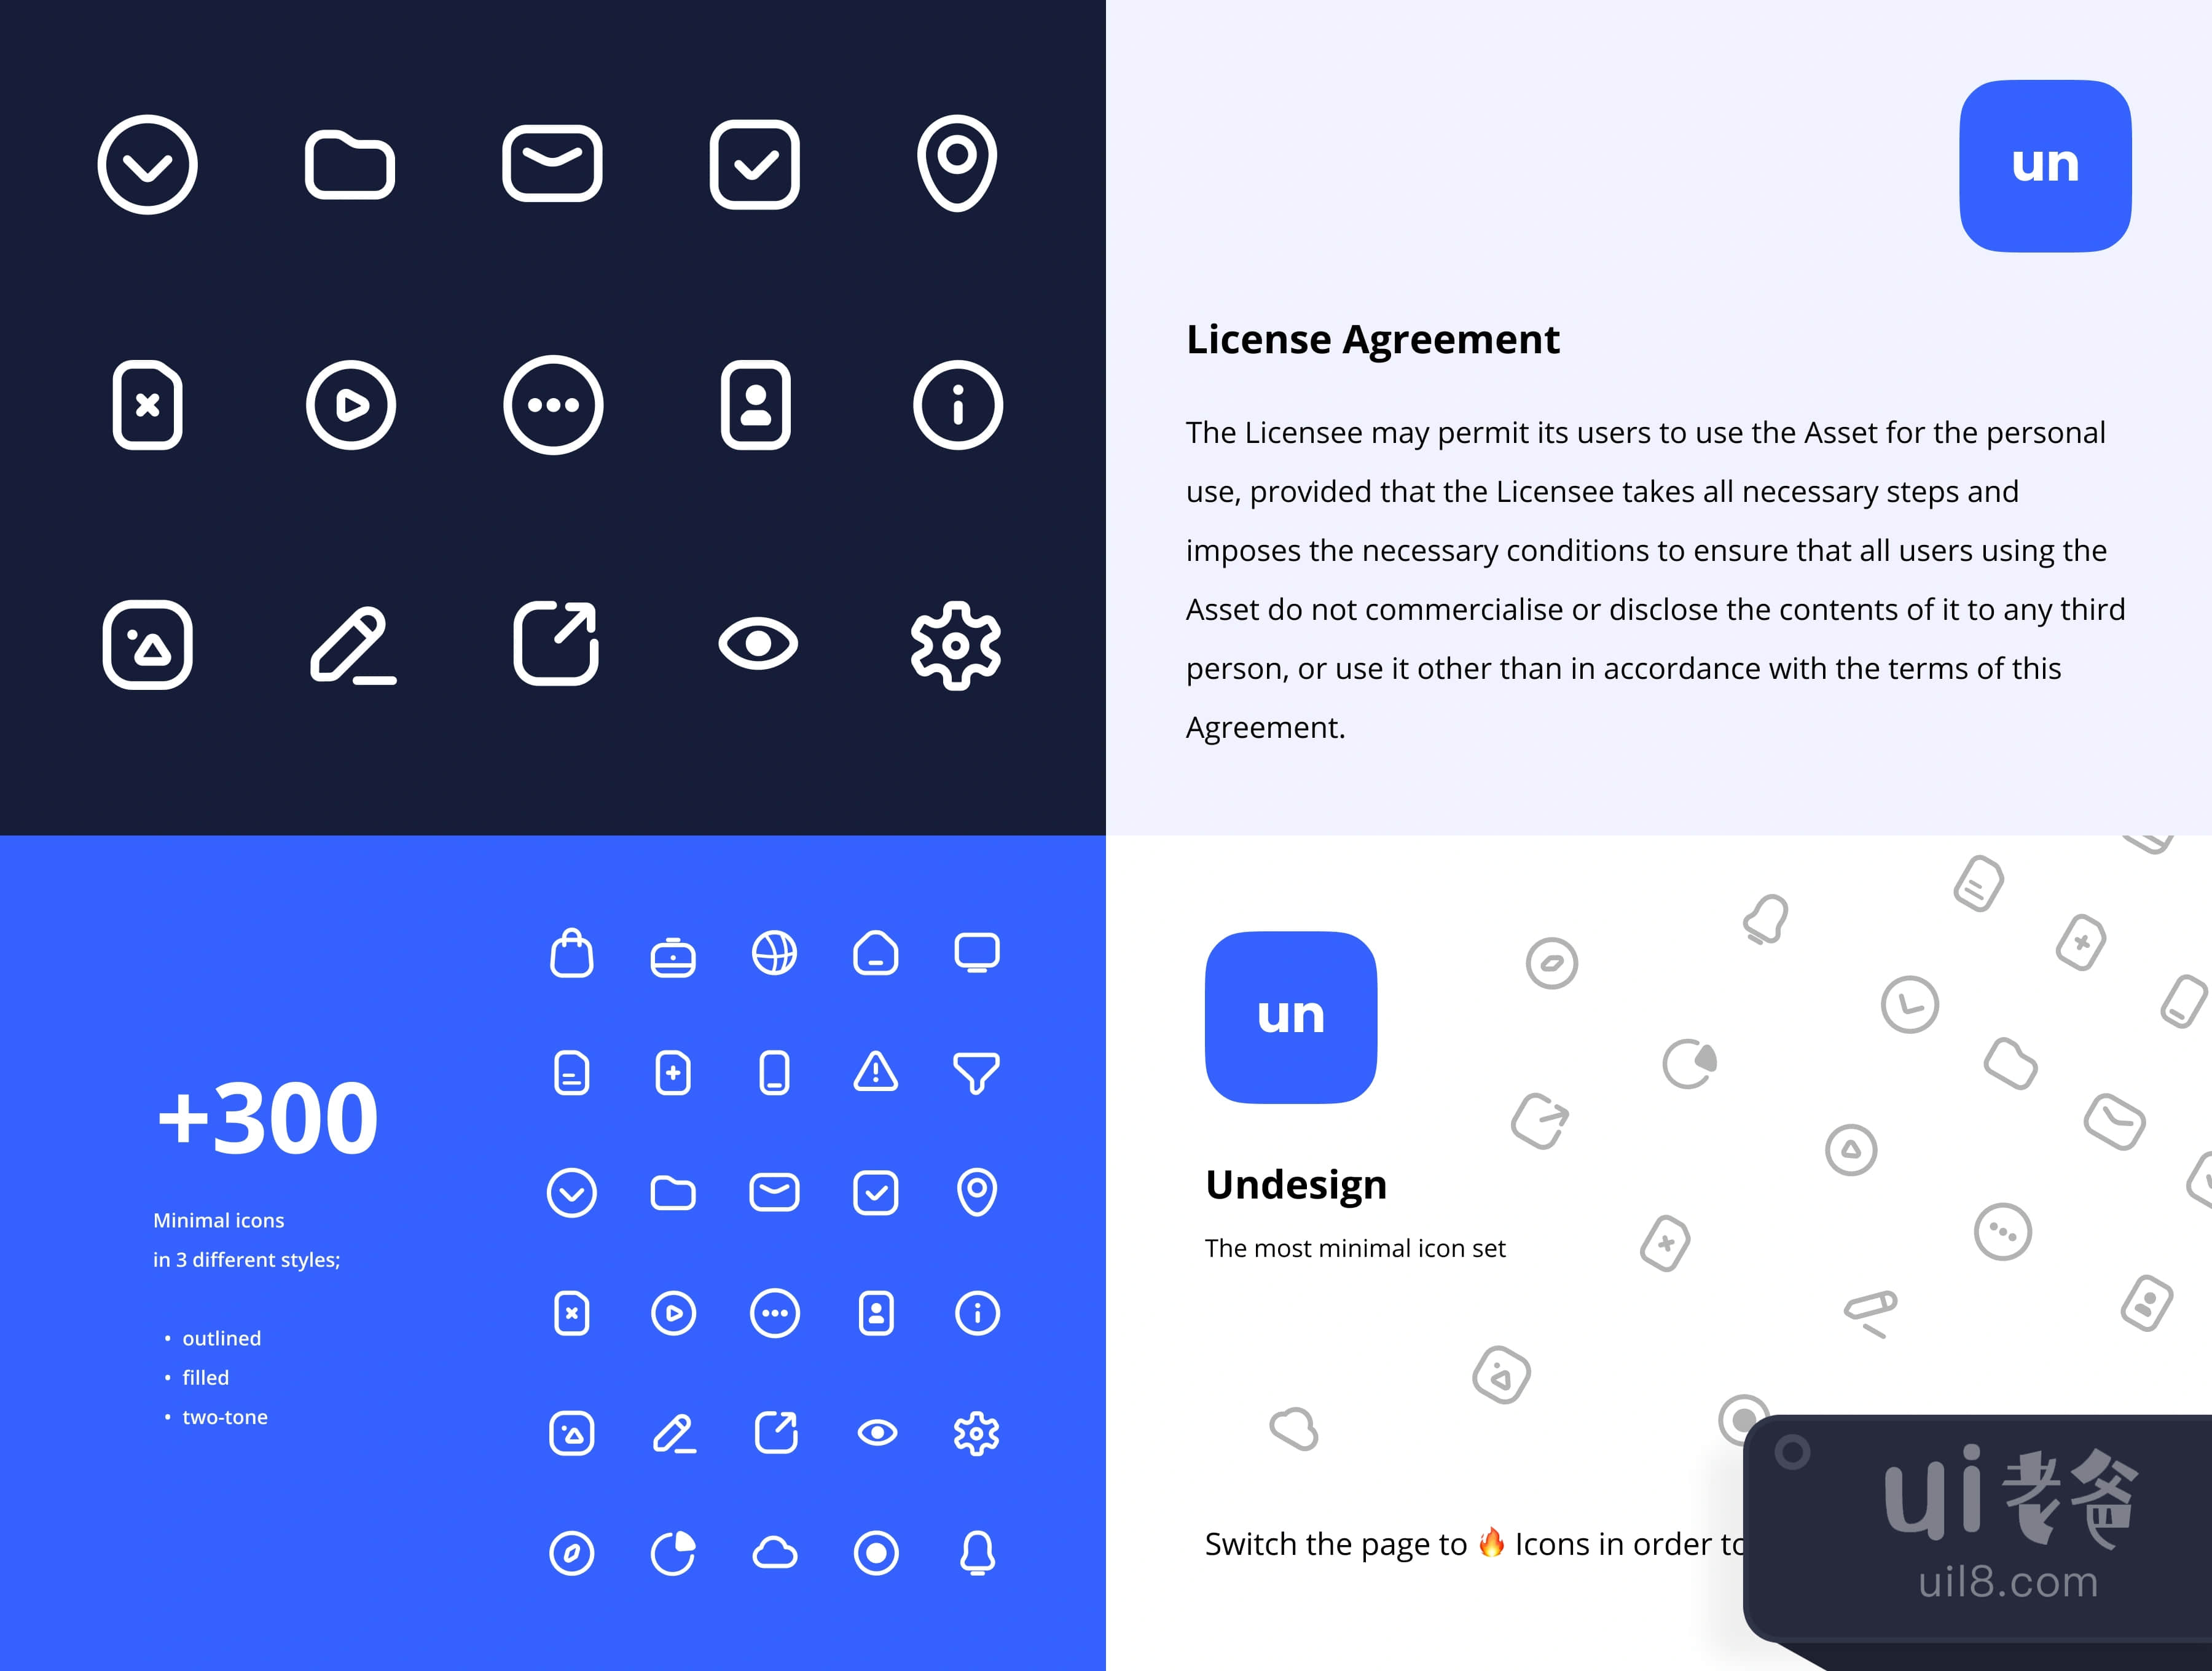 Figma的Undesign图标集 (Undesign Icon Set for Figma)插图